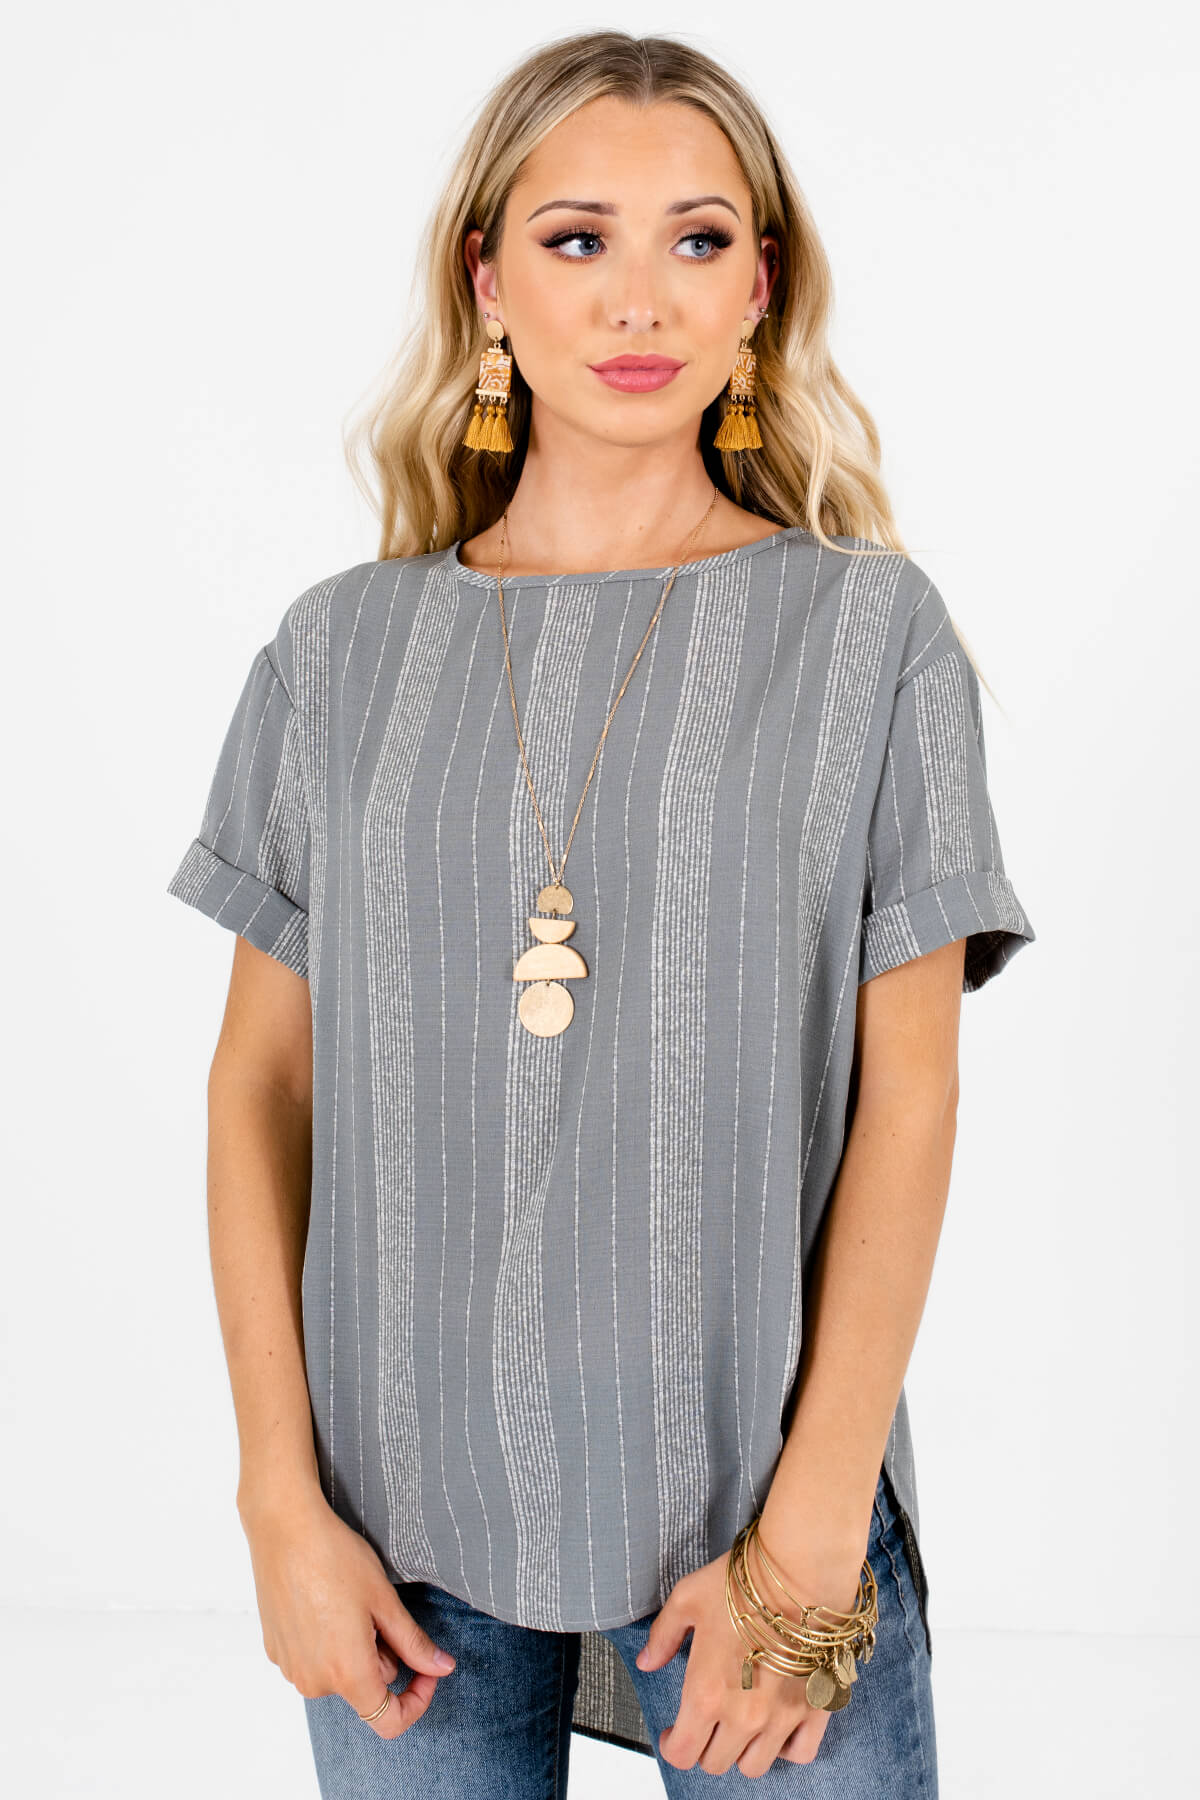 Women's Rounded Neckline Boutique Tops